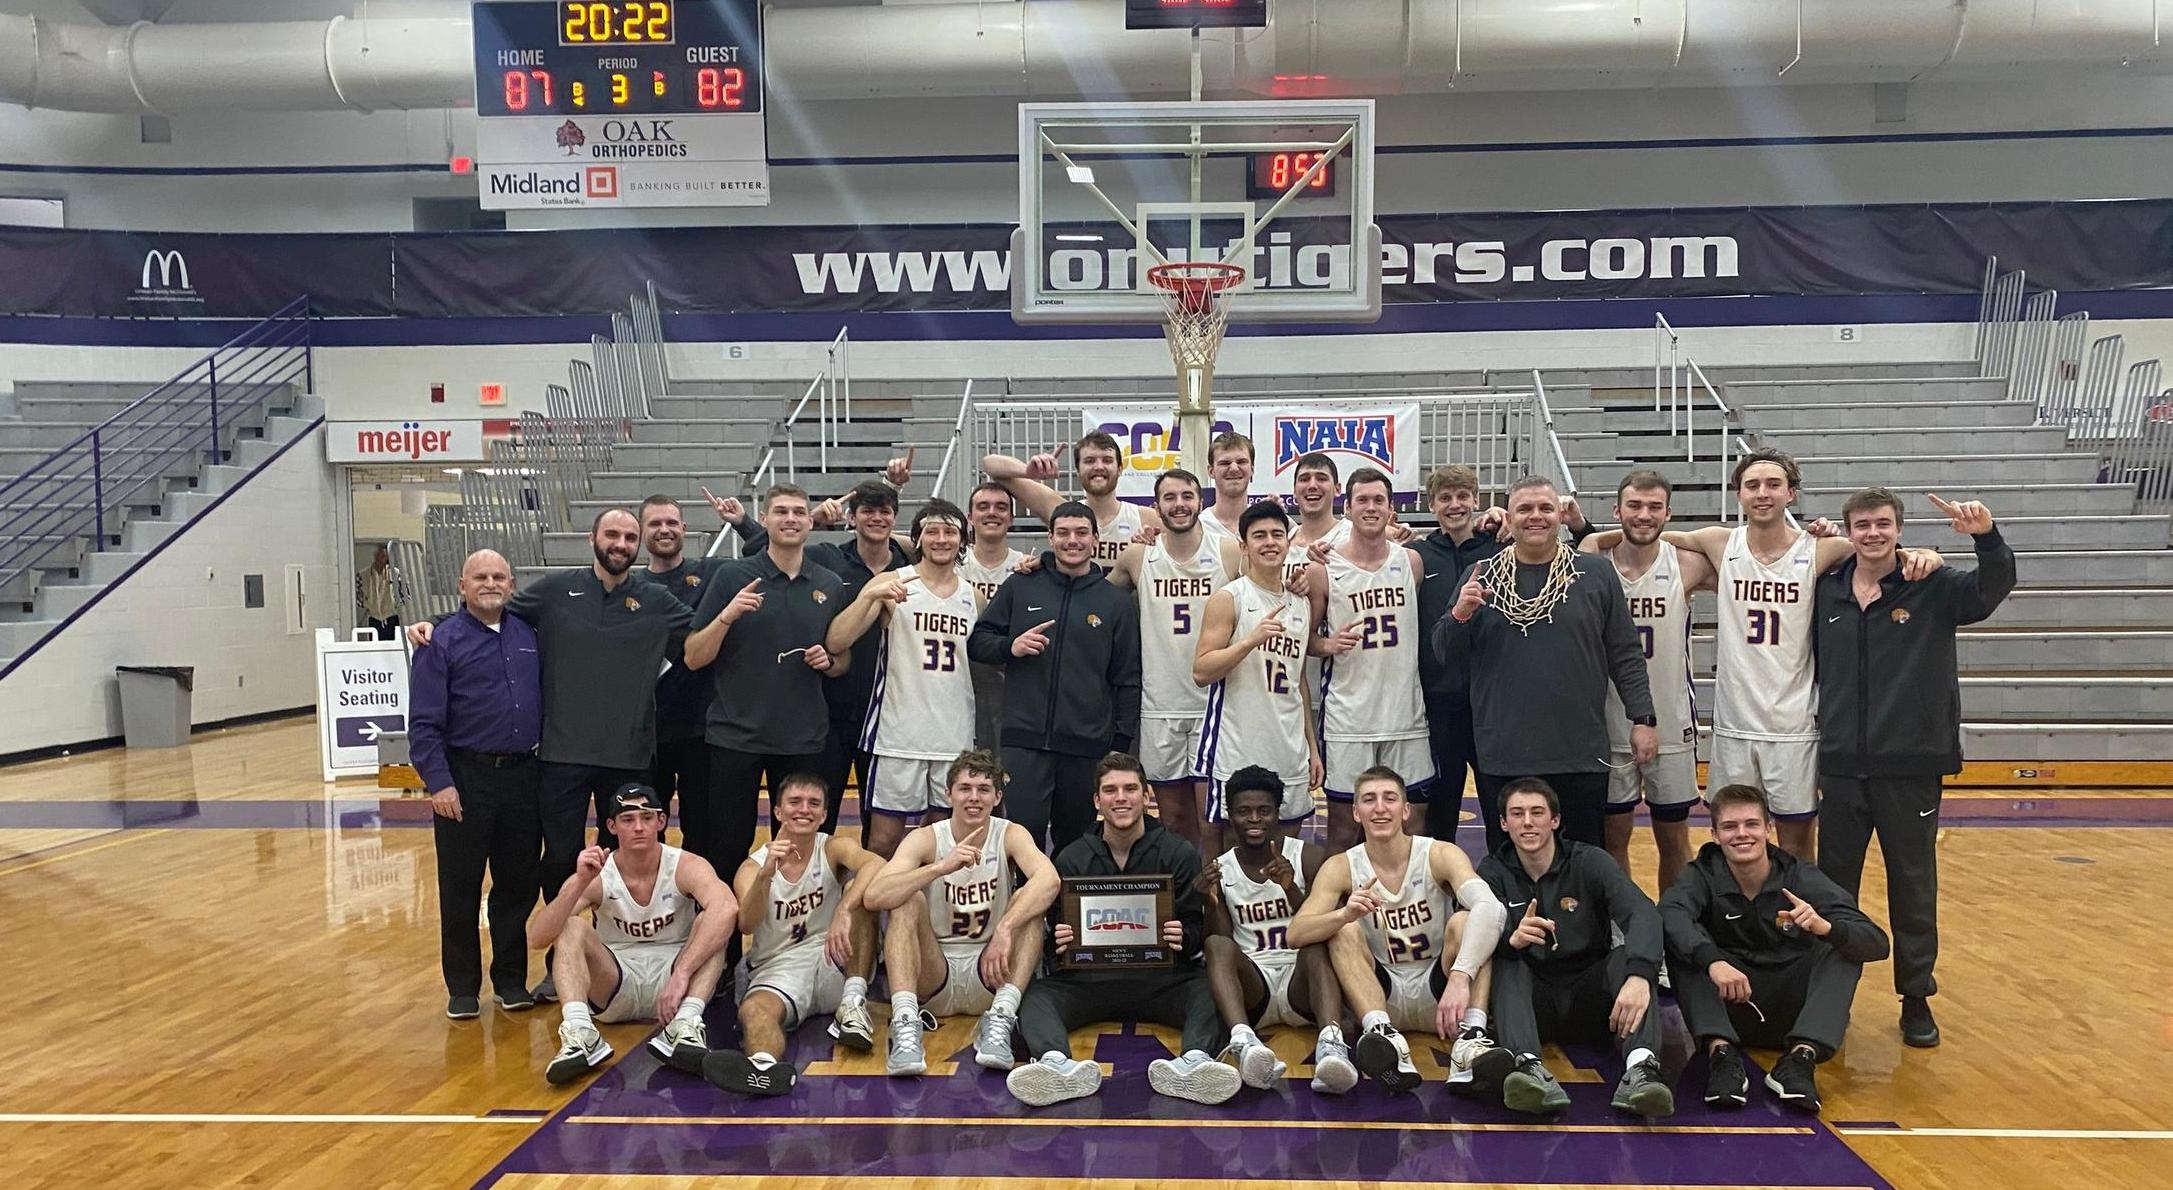 NO. 11 TIGERS CAPTURE THE CCAC TOURNAMENT CHAMPIONSHIP FOR THE FIRST TIME SINCE 2015 IN 87-82 VICTORY OVER LINCOLN